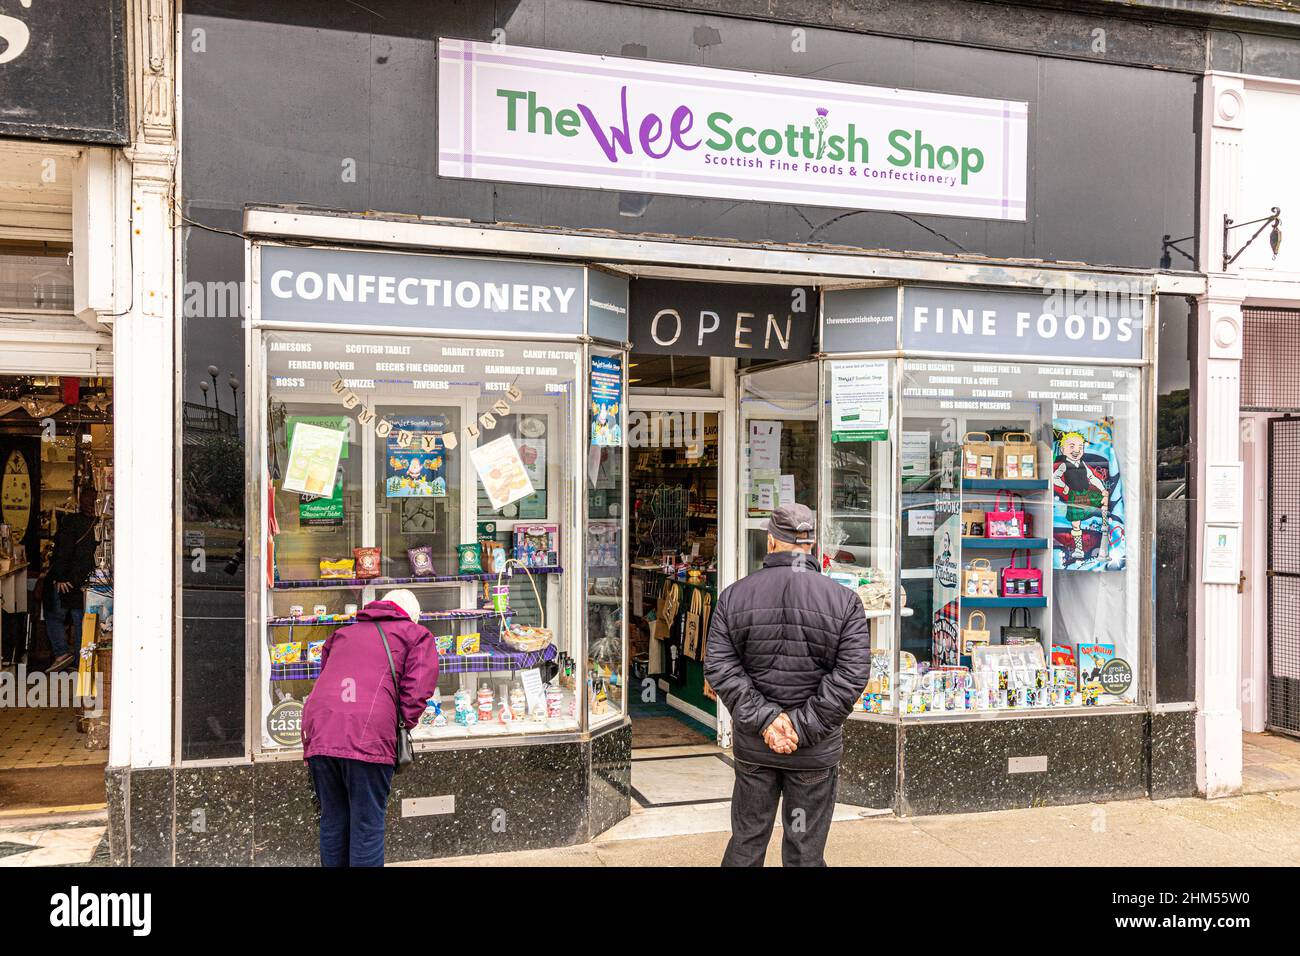 Customers perusing The Wee Scottish Shop in Victoria Street, Rothesay on the Isle of Bute, Argyll & Bute, Scotland UK Stock Photo